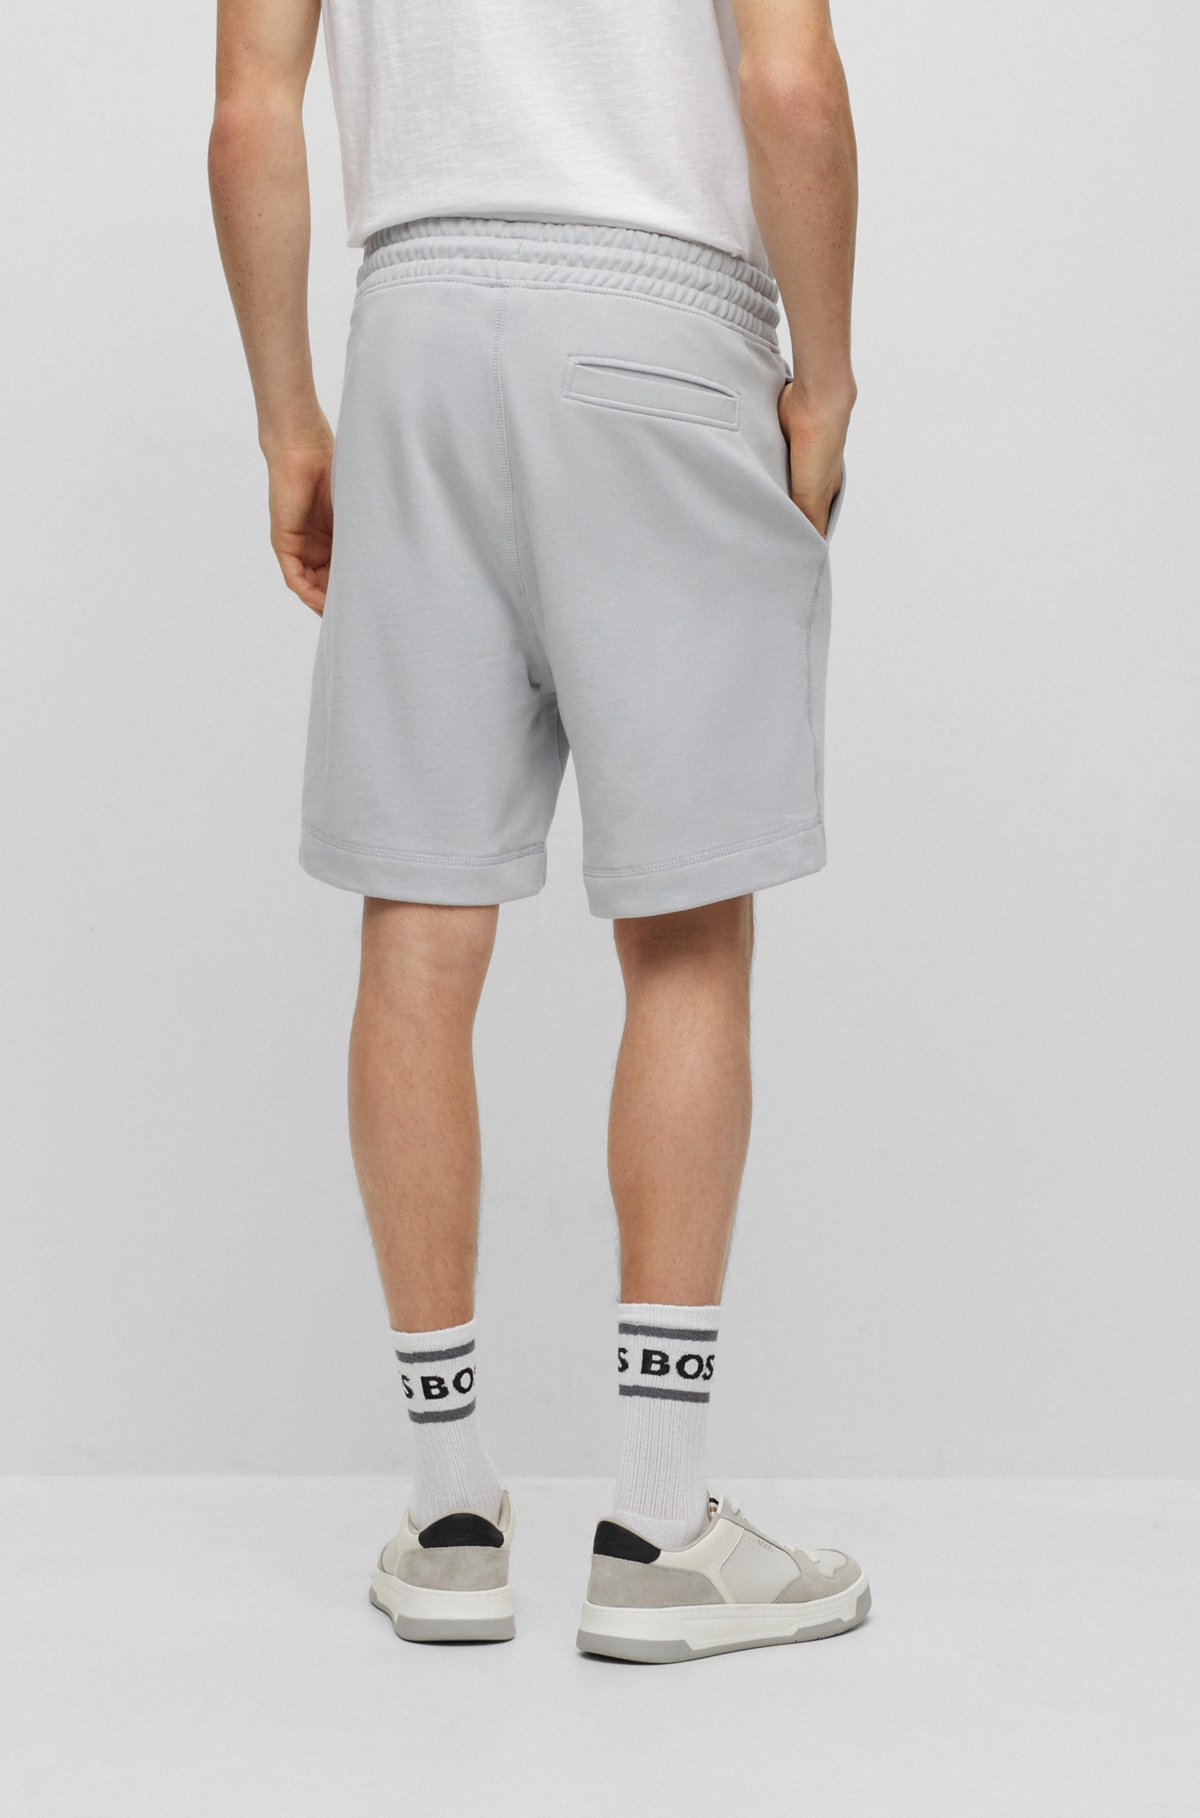 Drawstring shorts in French terry cotton with logo patch, Light Grey